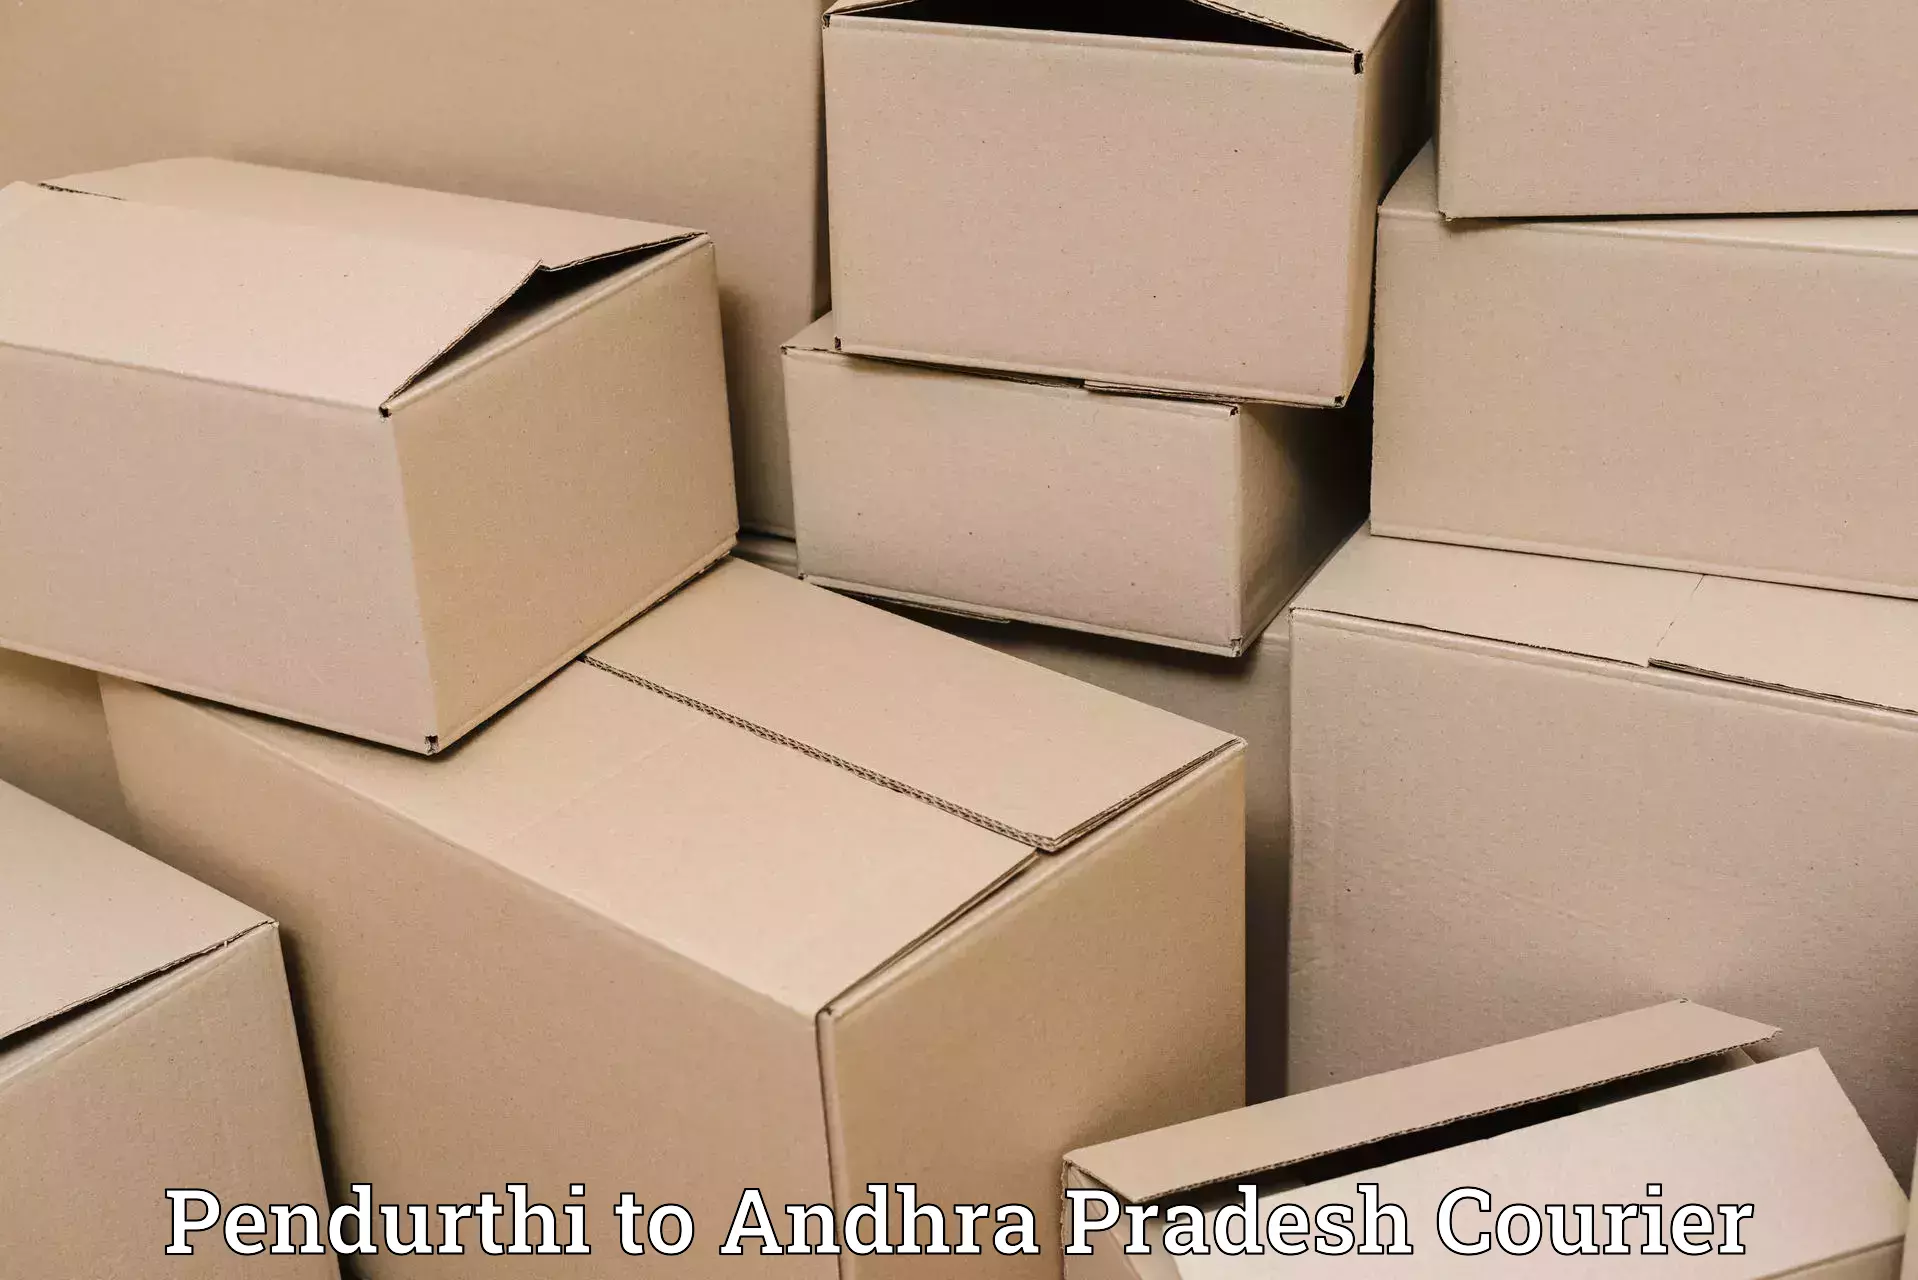 Flexible delivery schedules Pendurthi to Chintalapudi